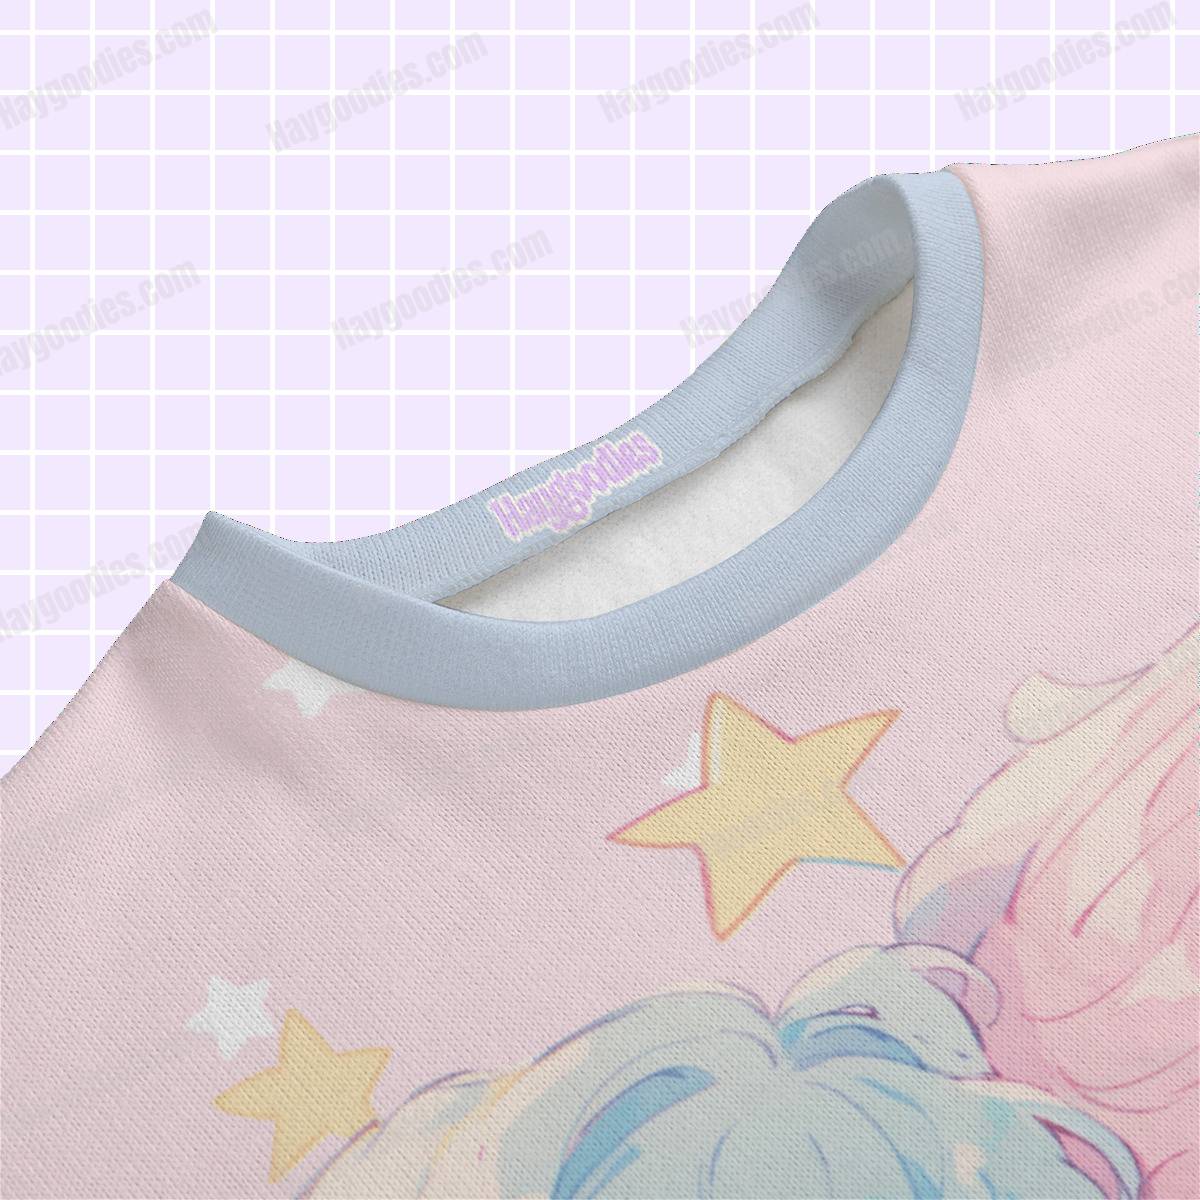 Pastel Sweet Pink and Blue Anime Girls Unisex Knitted Fleece Lined Oversized Sweater- S to 7XL